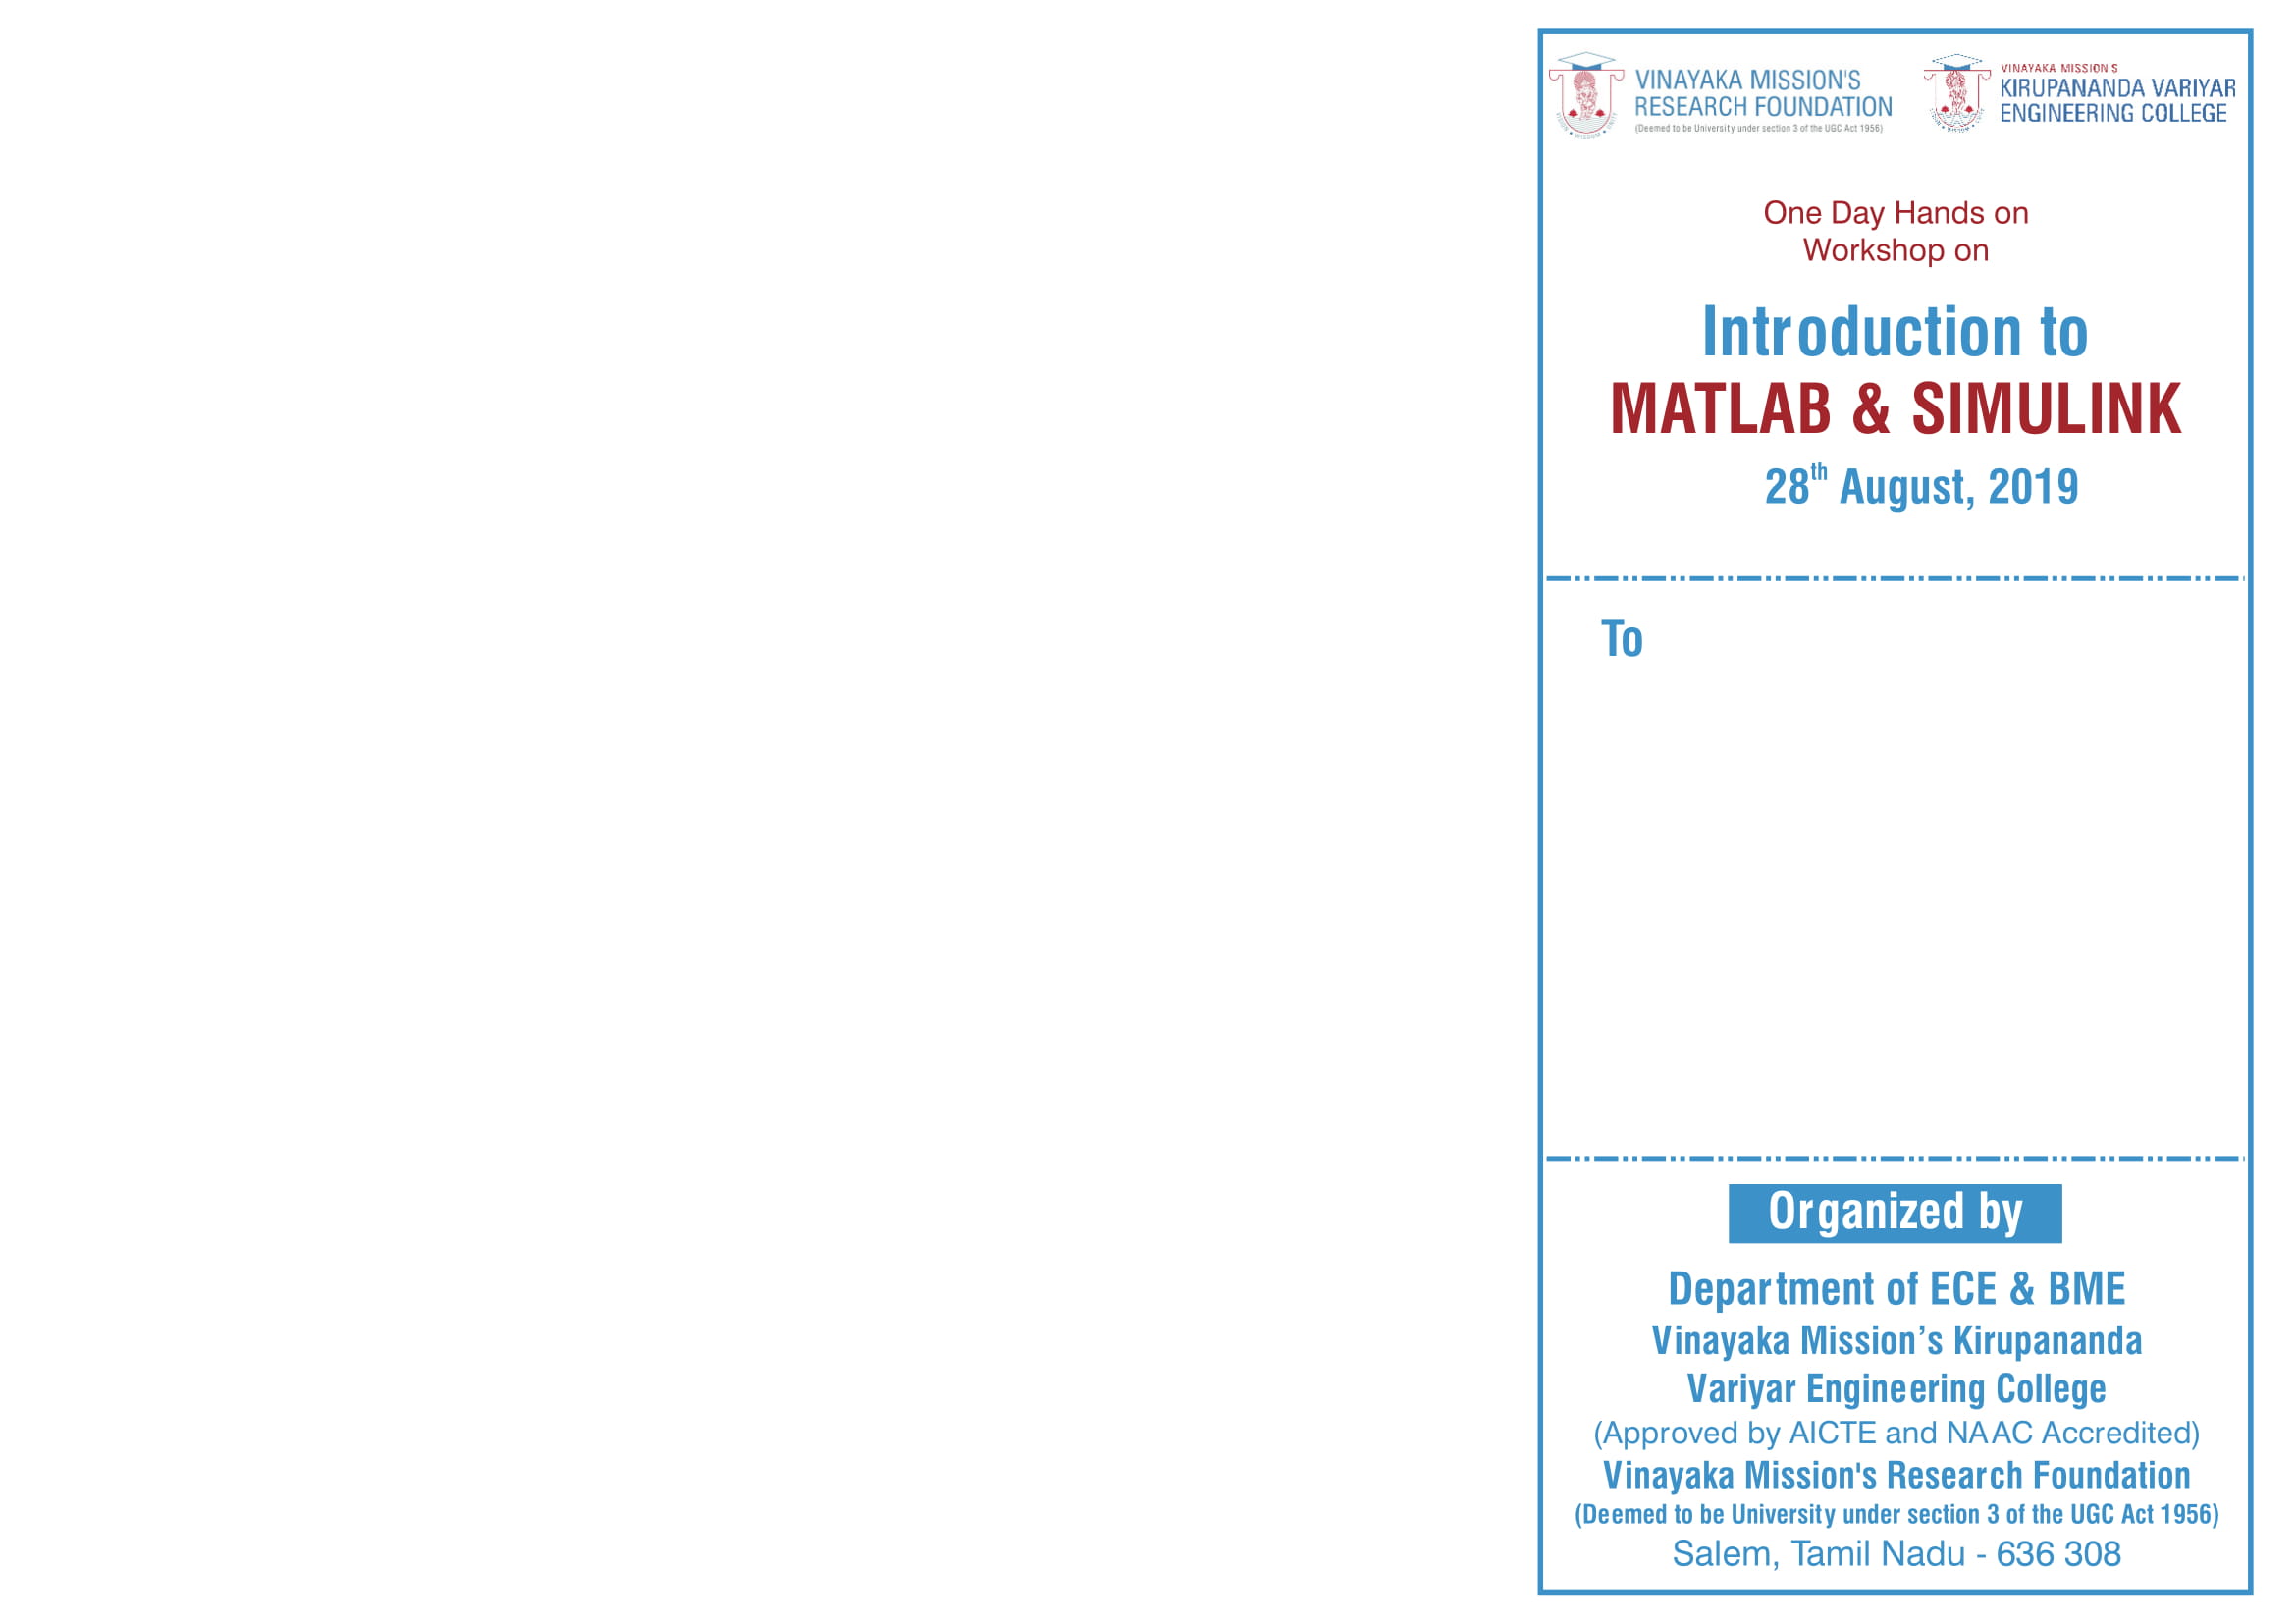 Workshop on Introduction to Matlab and Simulink 2019